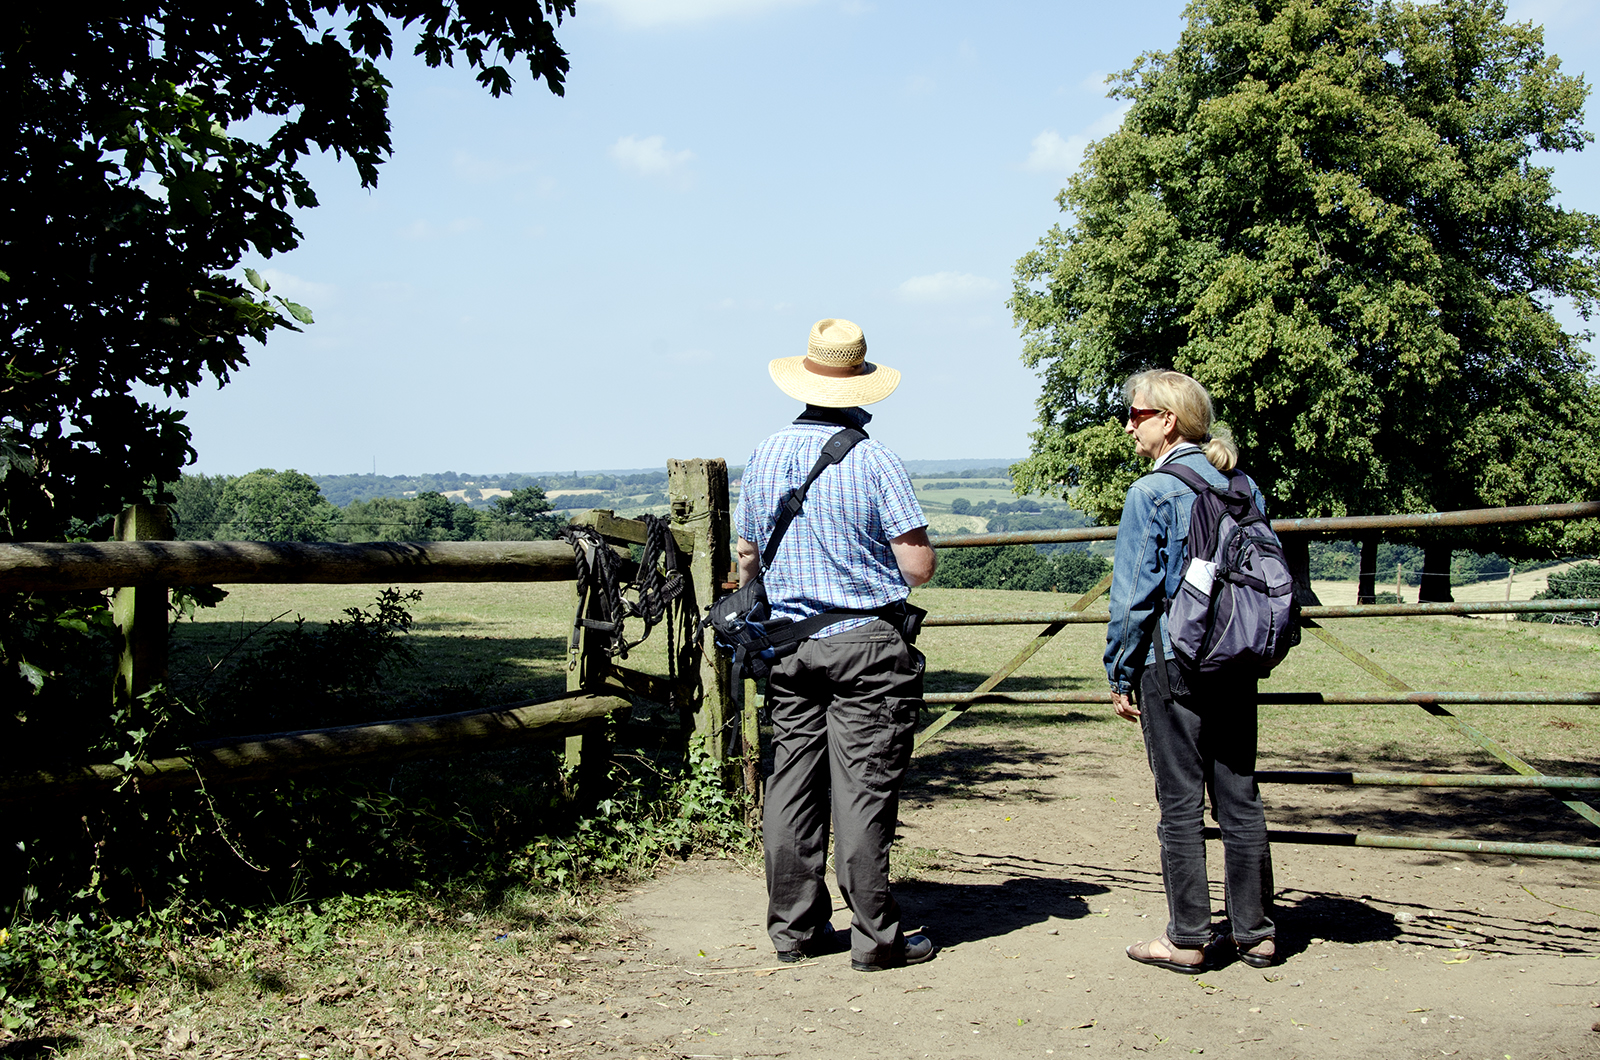 2016-08-17-Havering_View-towards-Hainault-Forest_Walkers-Enjoying-the-View_Summer